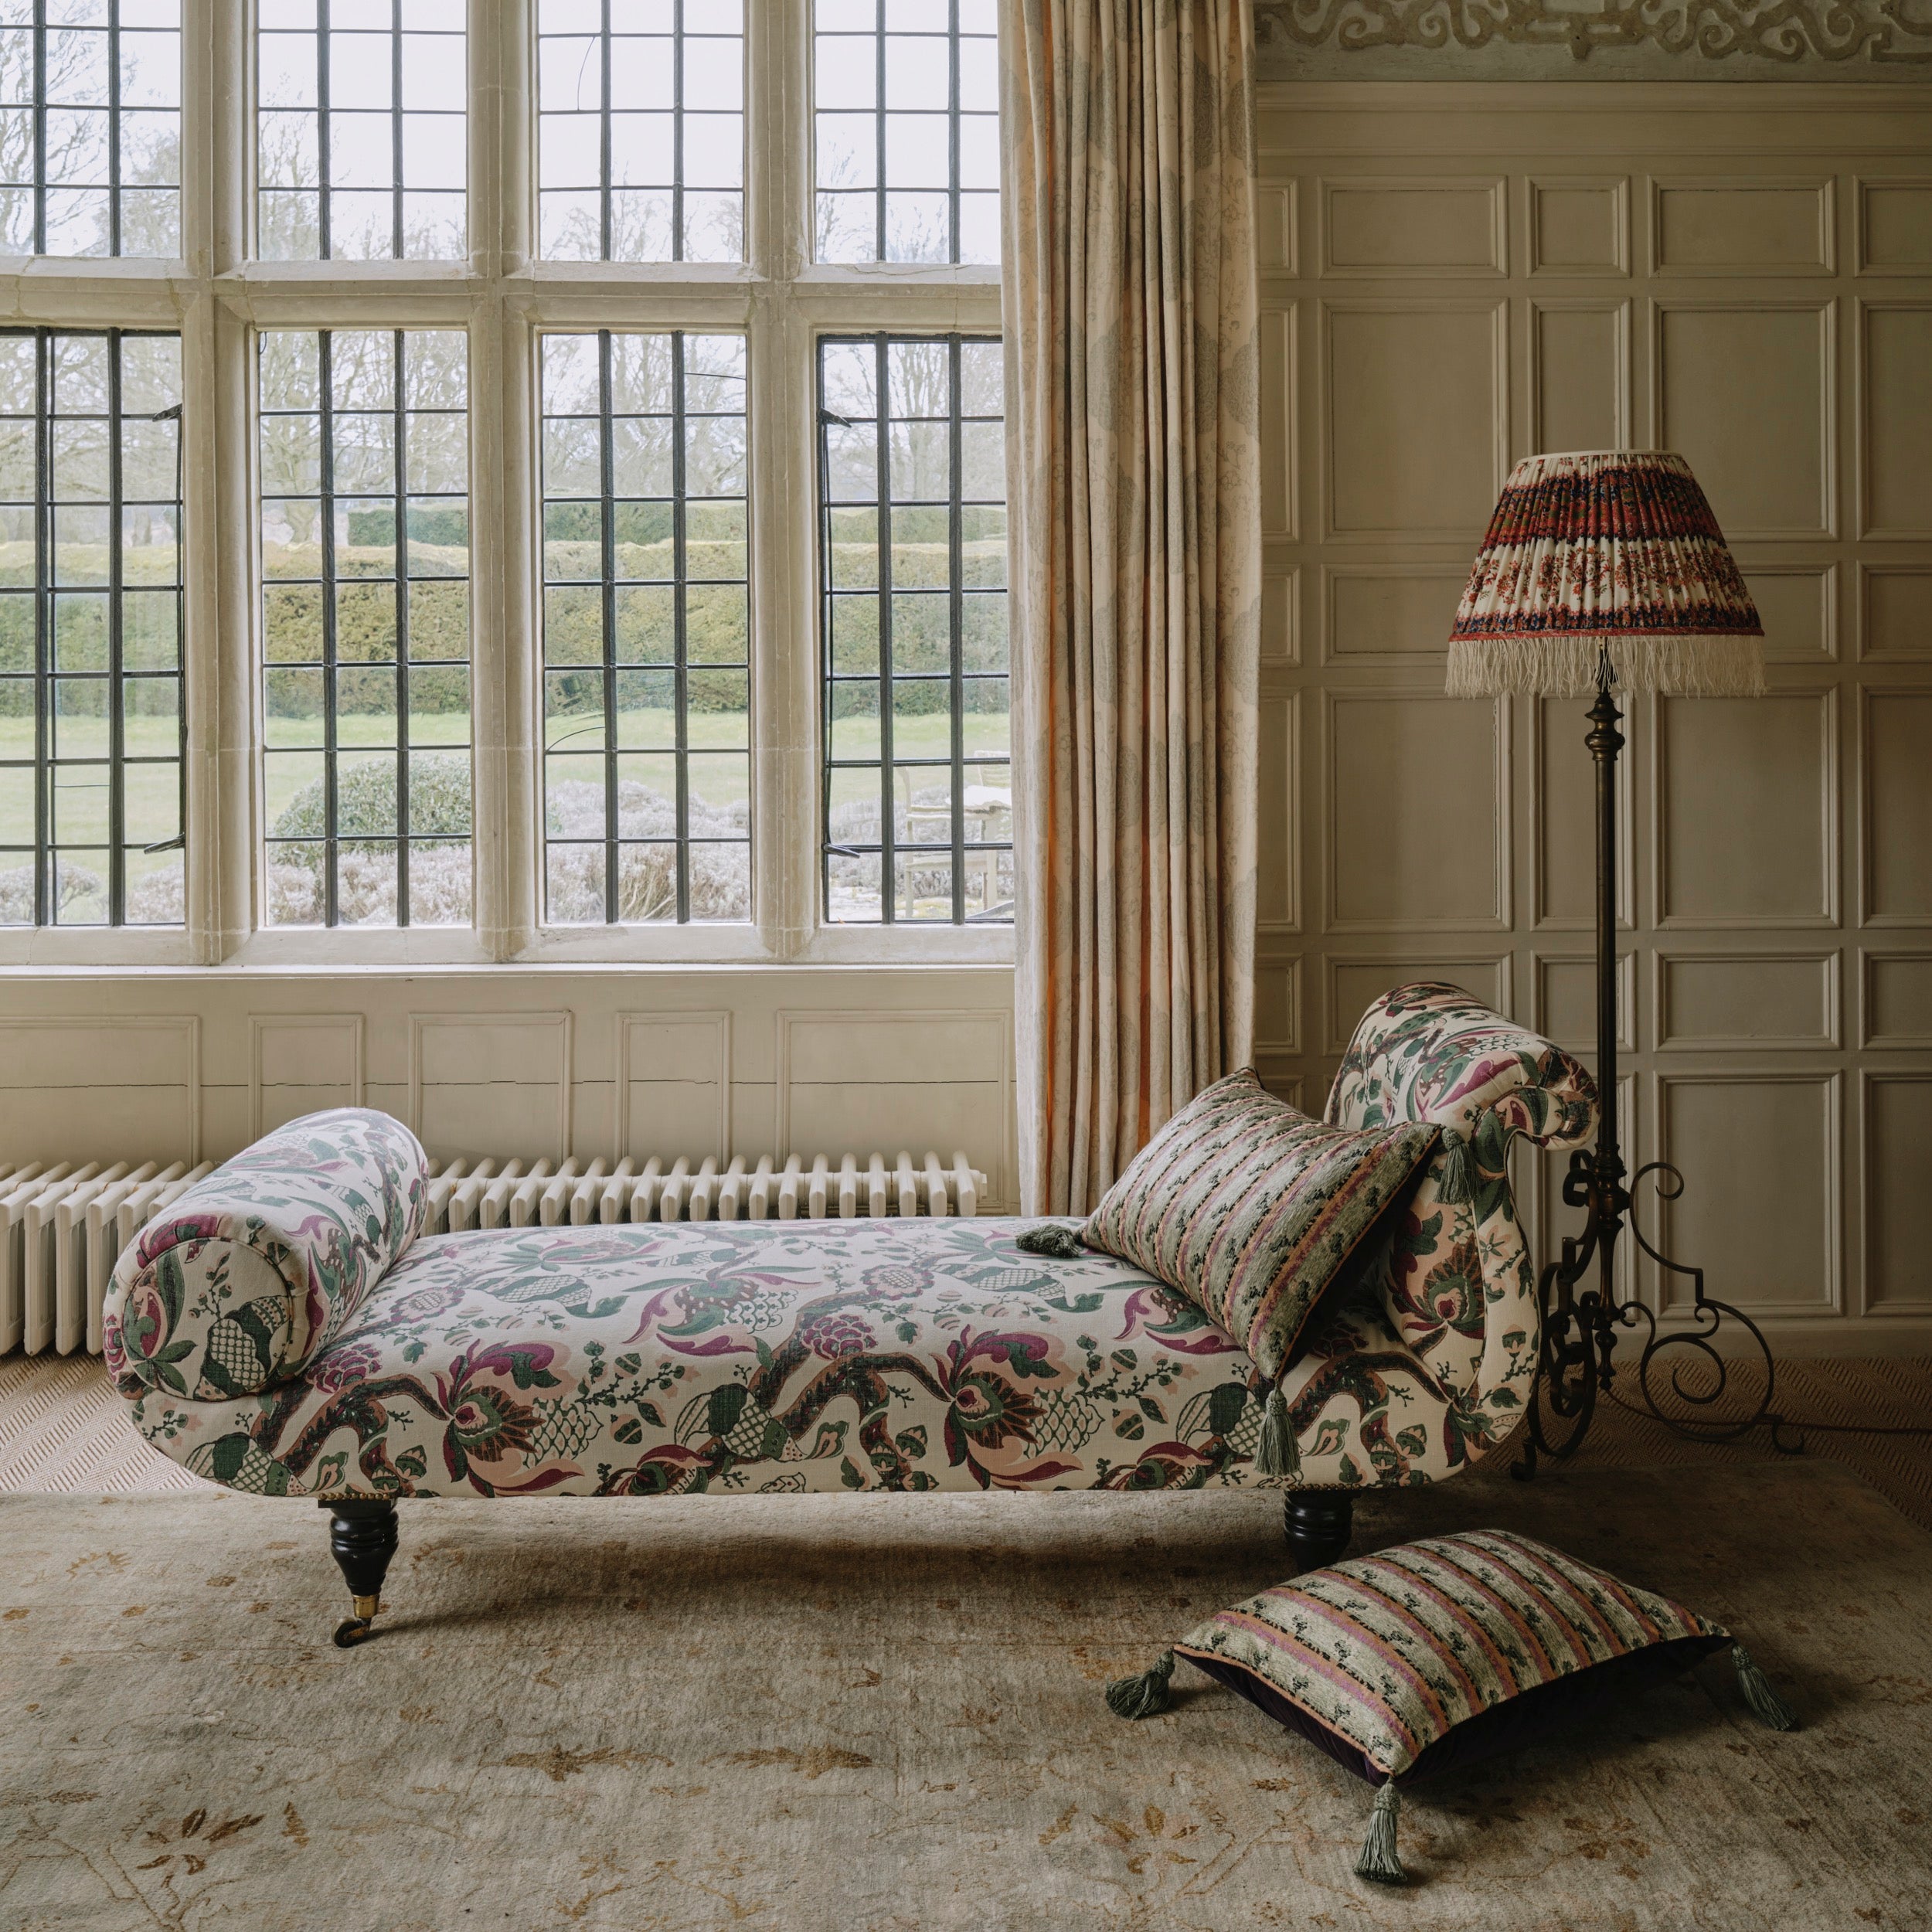 An Early Victorian Chatsworth Chaise Longue in Flora Soames Cornucopia Pair Available